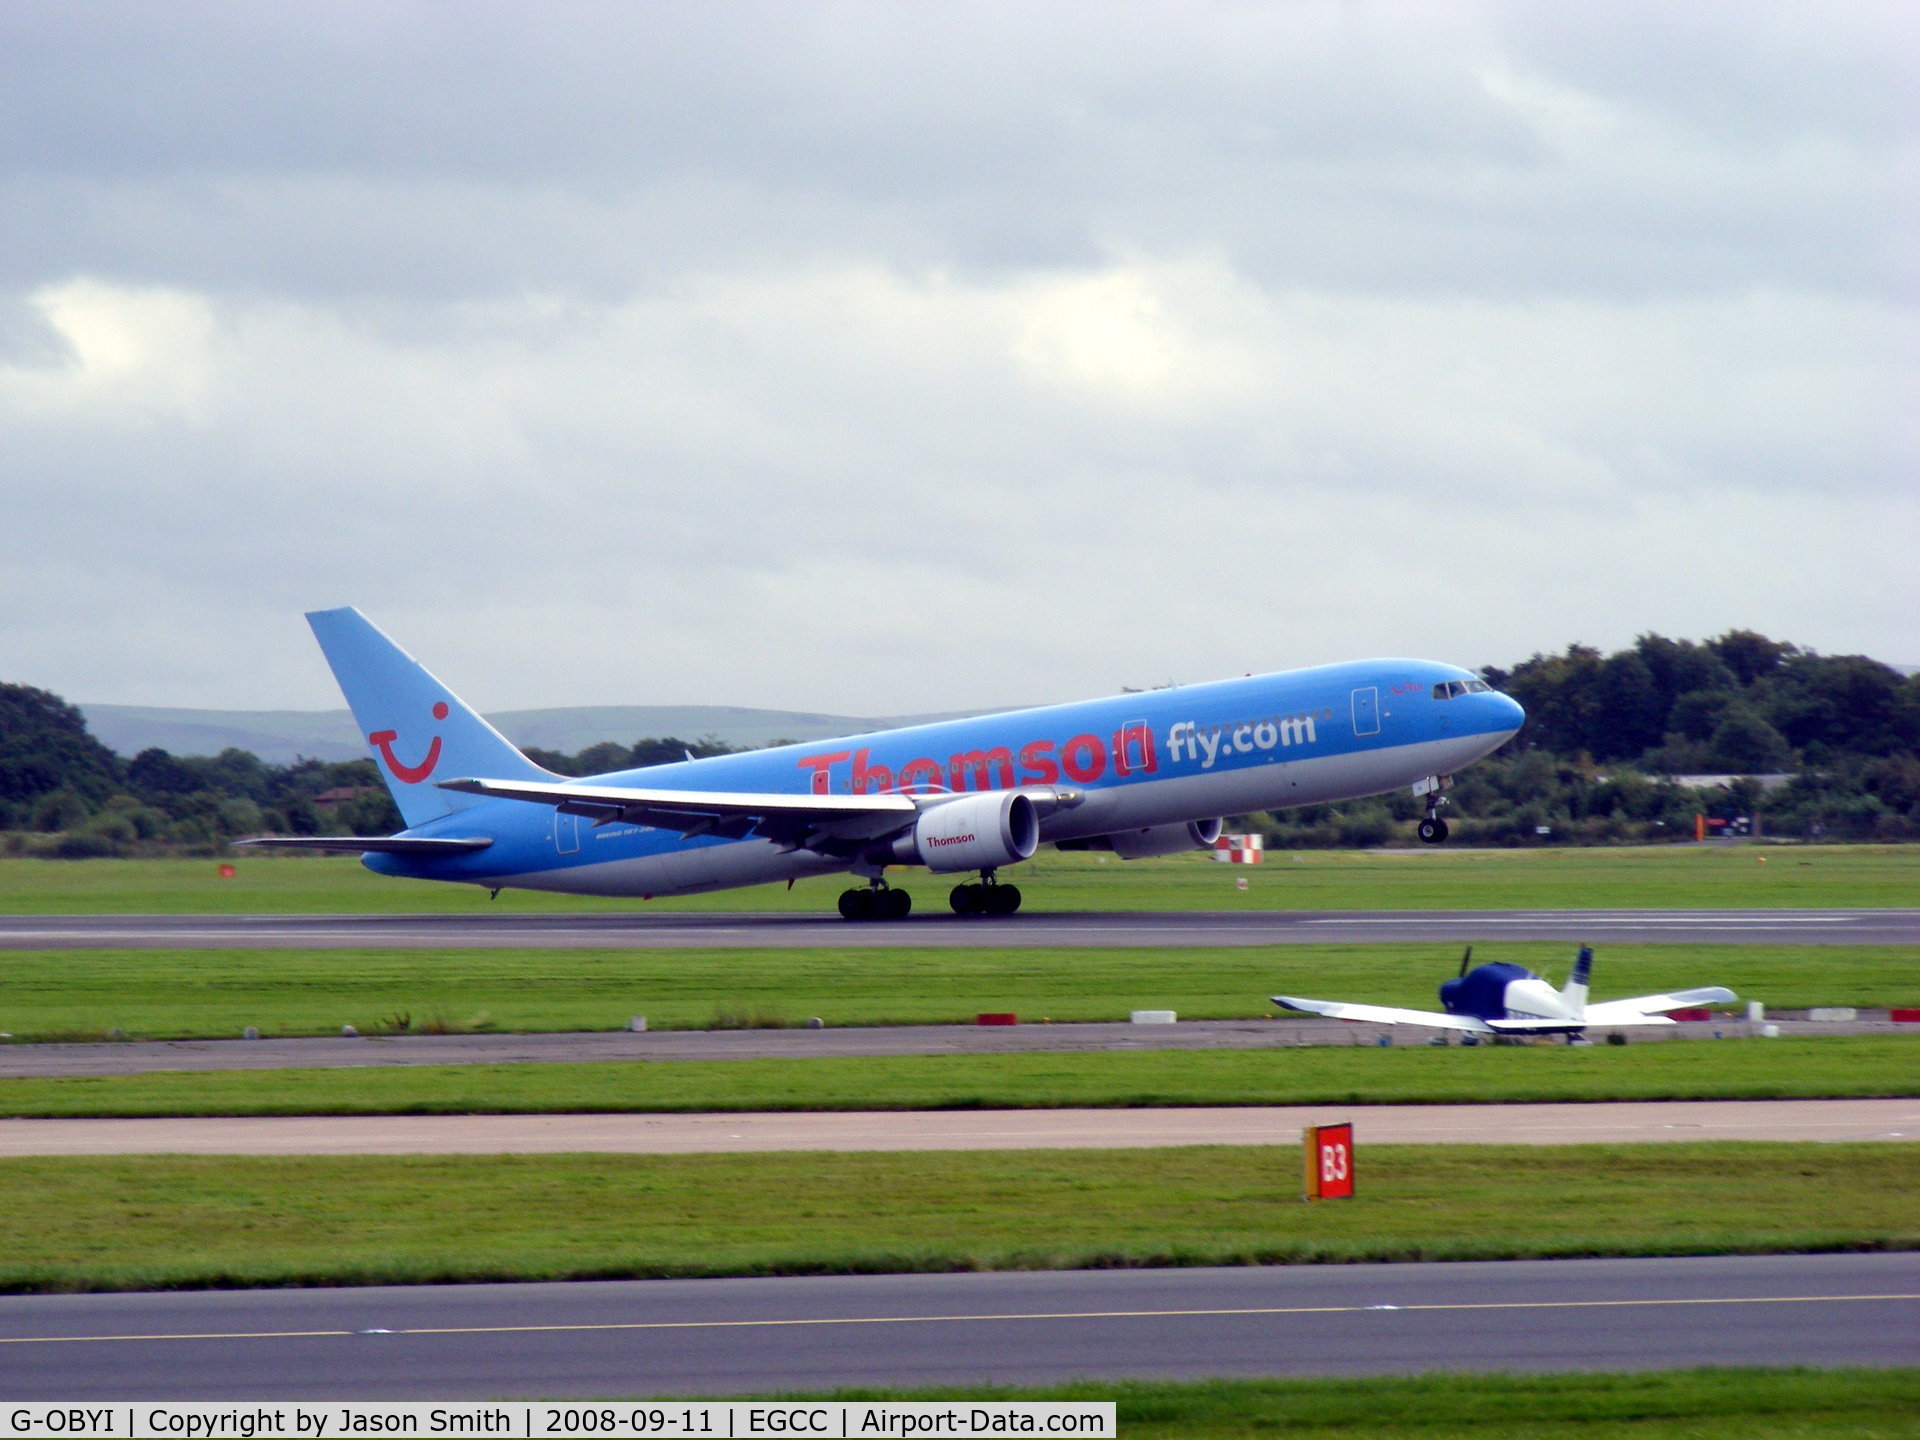 G-OBYI, 2000 Boeing 767-304/ER C/N 29138, Perfect Take-Off From EGCC/MAN (Manchester Airport)